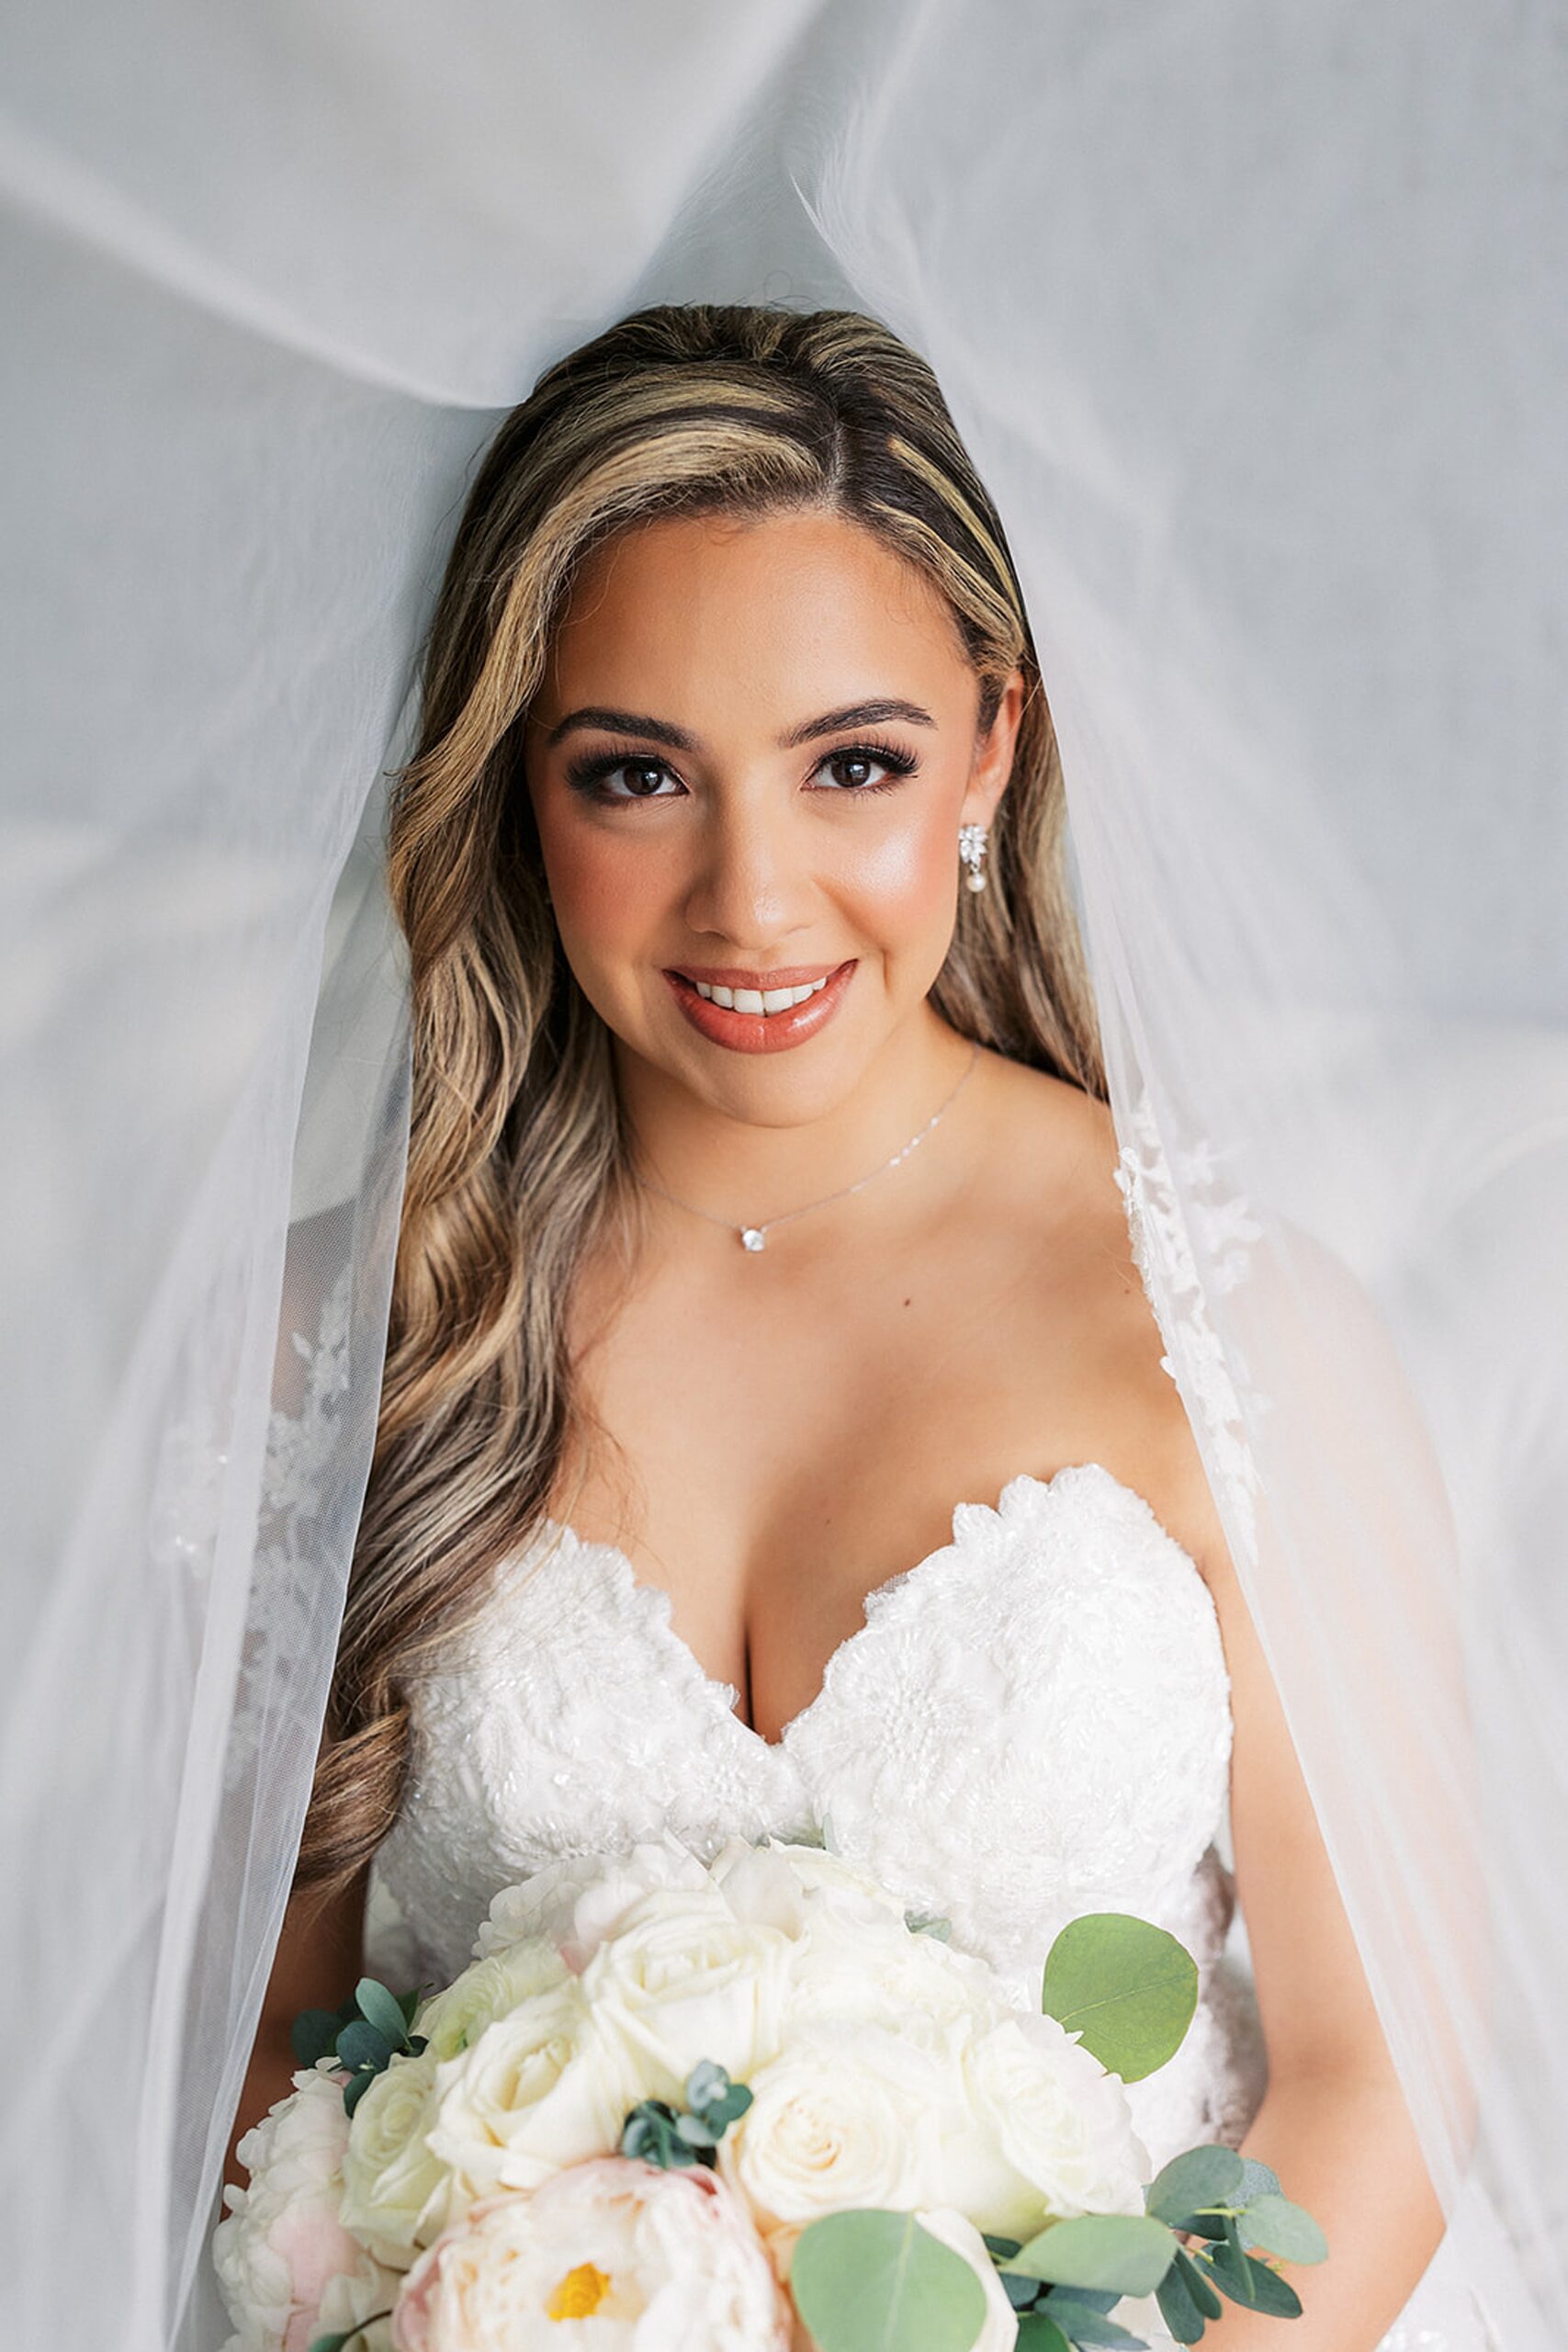 A bride hides under her veil while holding her white rose bouquet